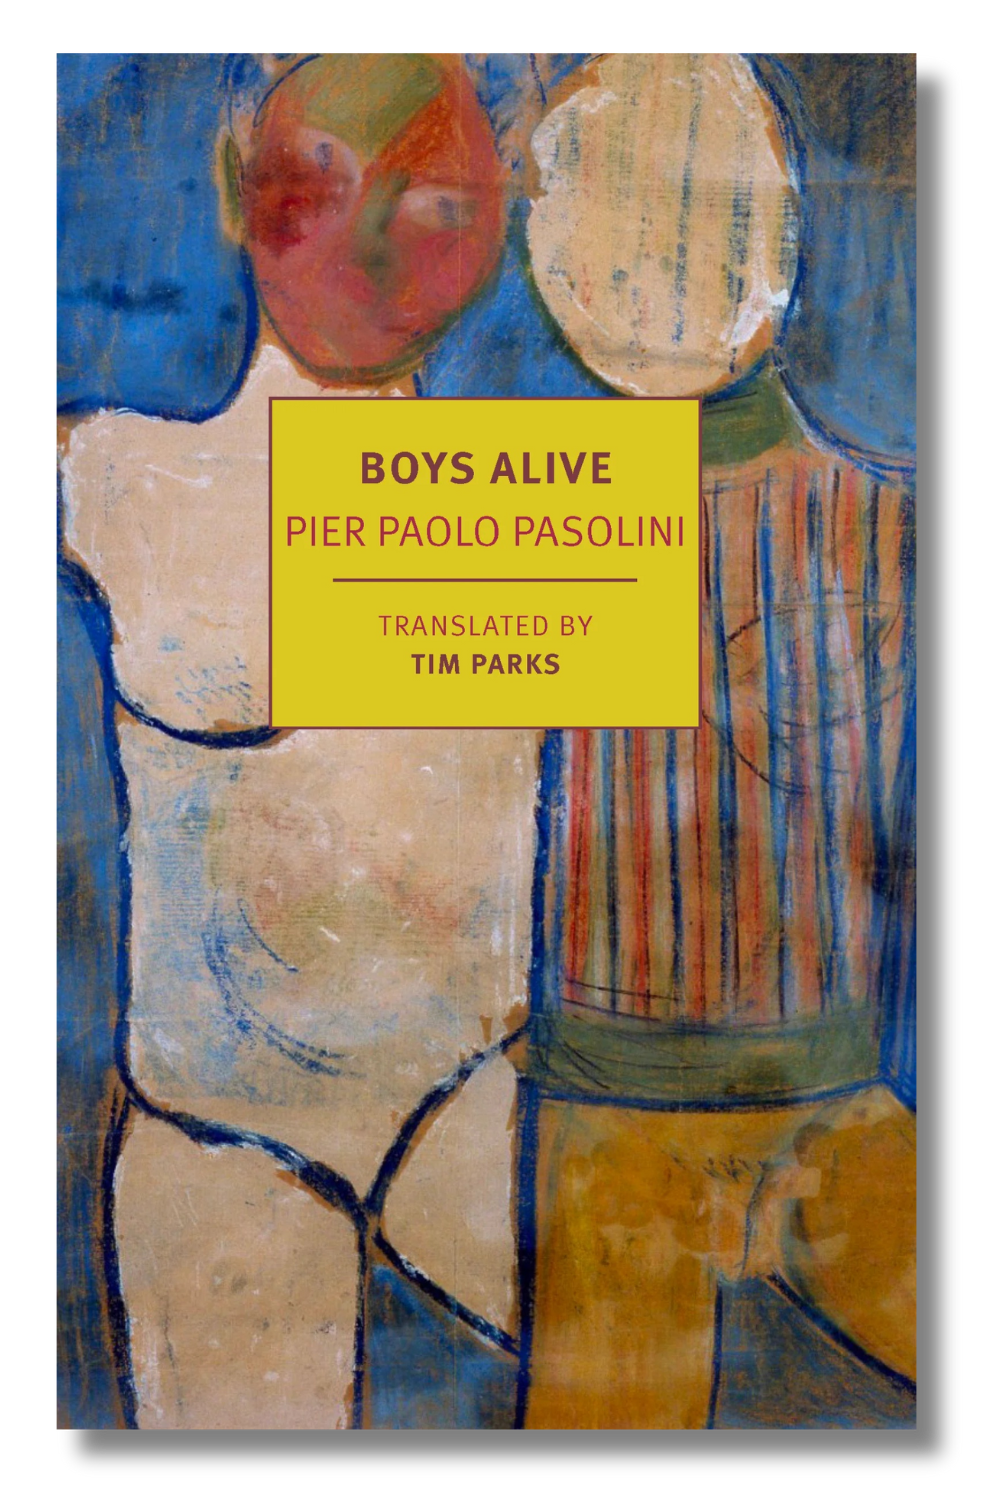 The cover of "Boys Alive" by Pier Paolo Pasolini, tr. by Tim Parks